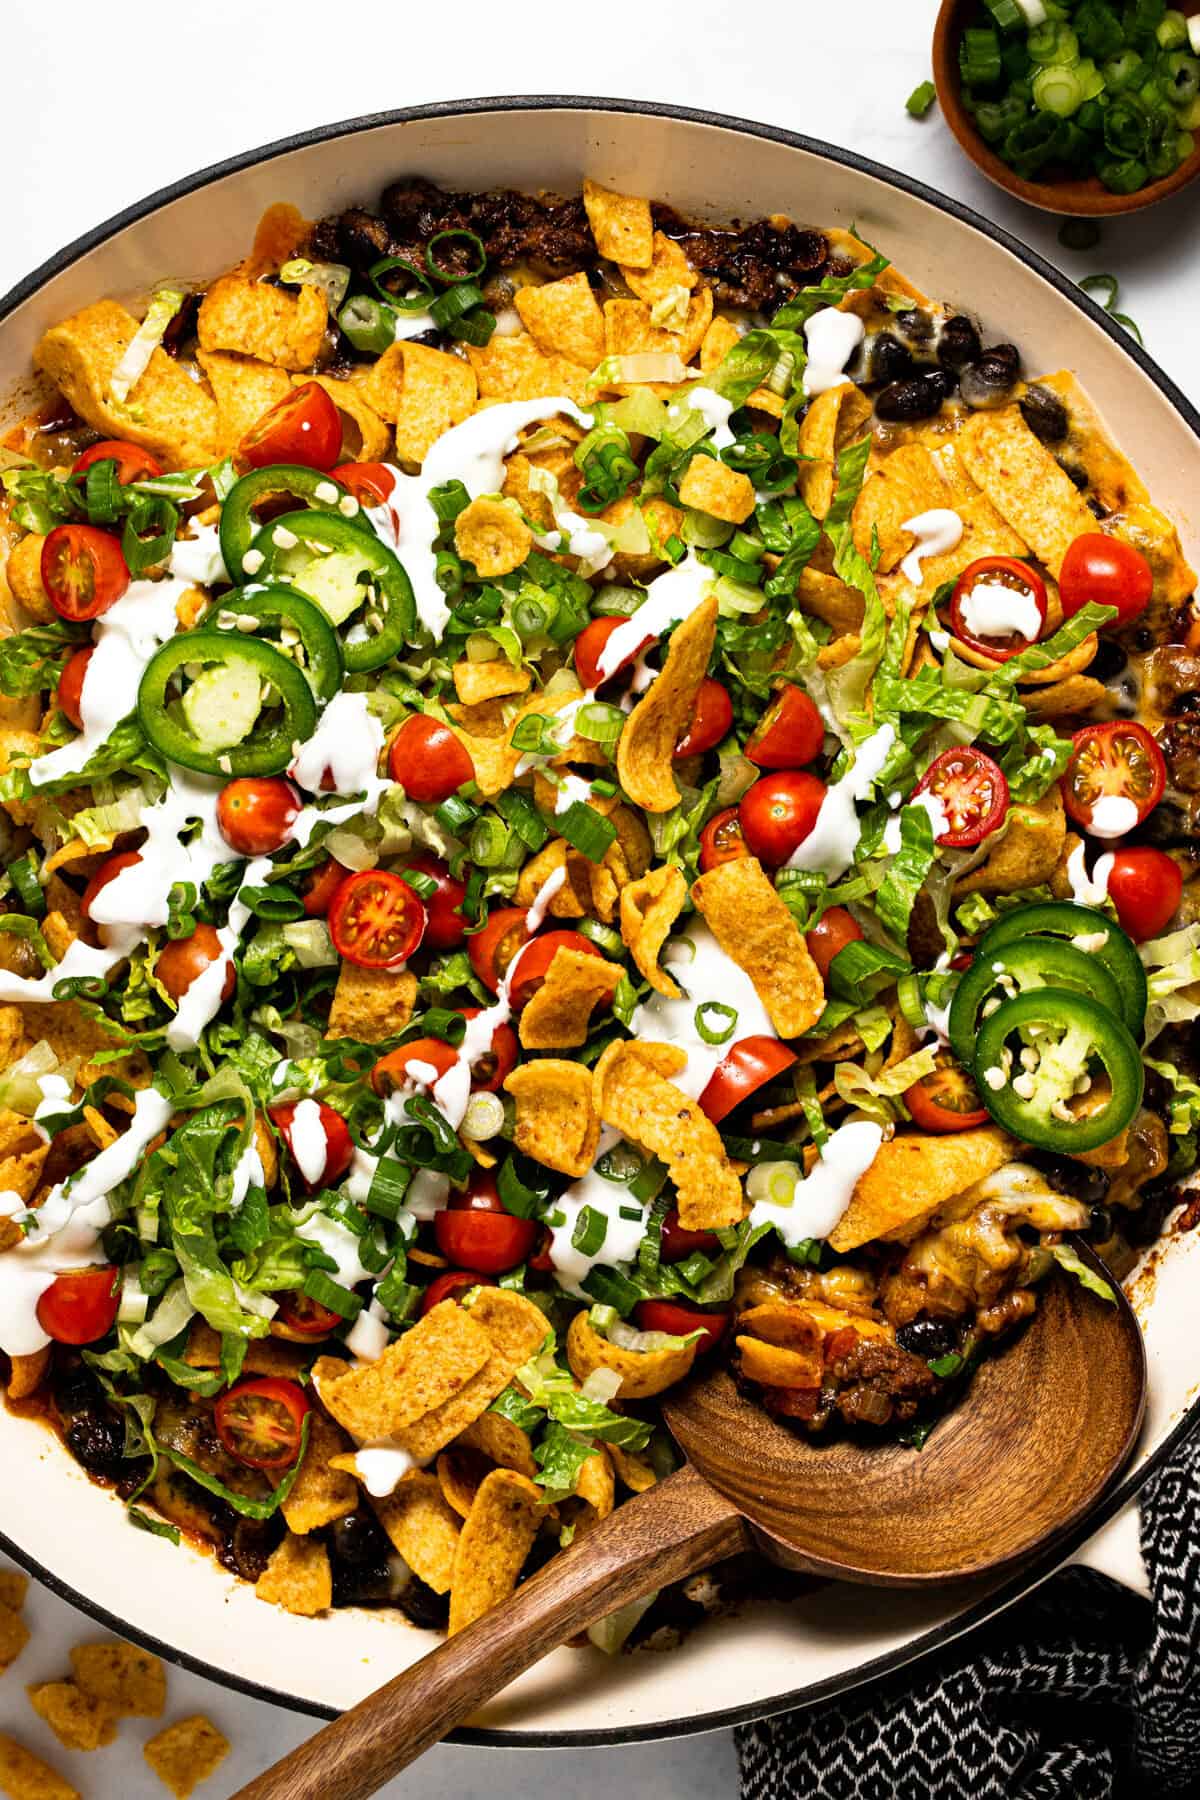 Overhead shot of a large pan filled with walking taco casserole garnished with sour cream